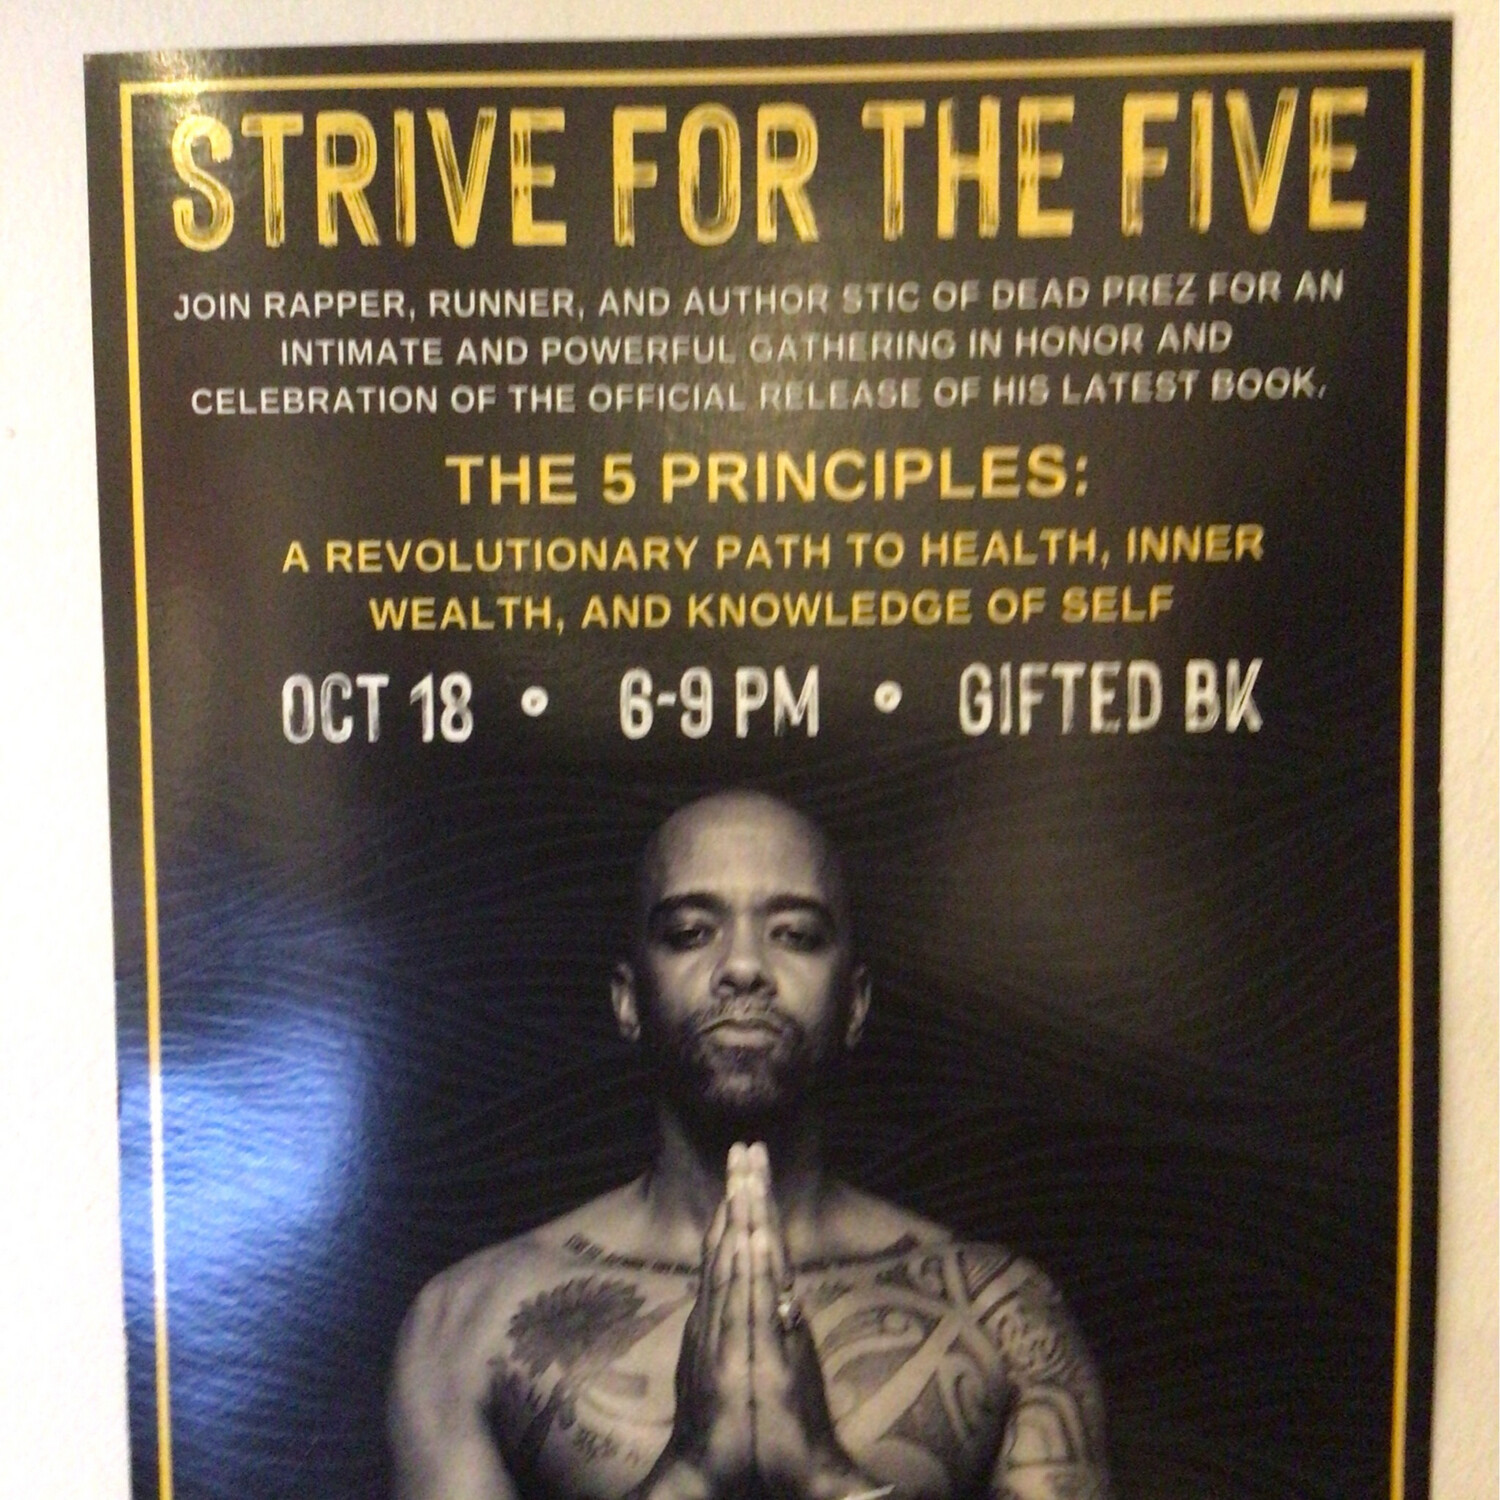 STRIVE FOR FIVE EVENT